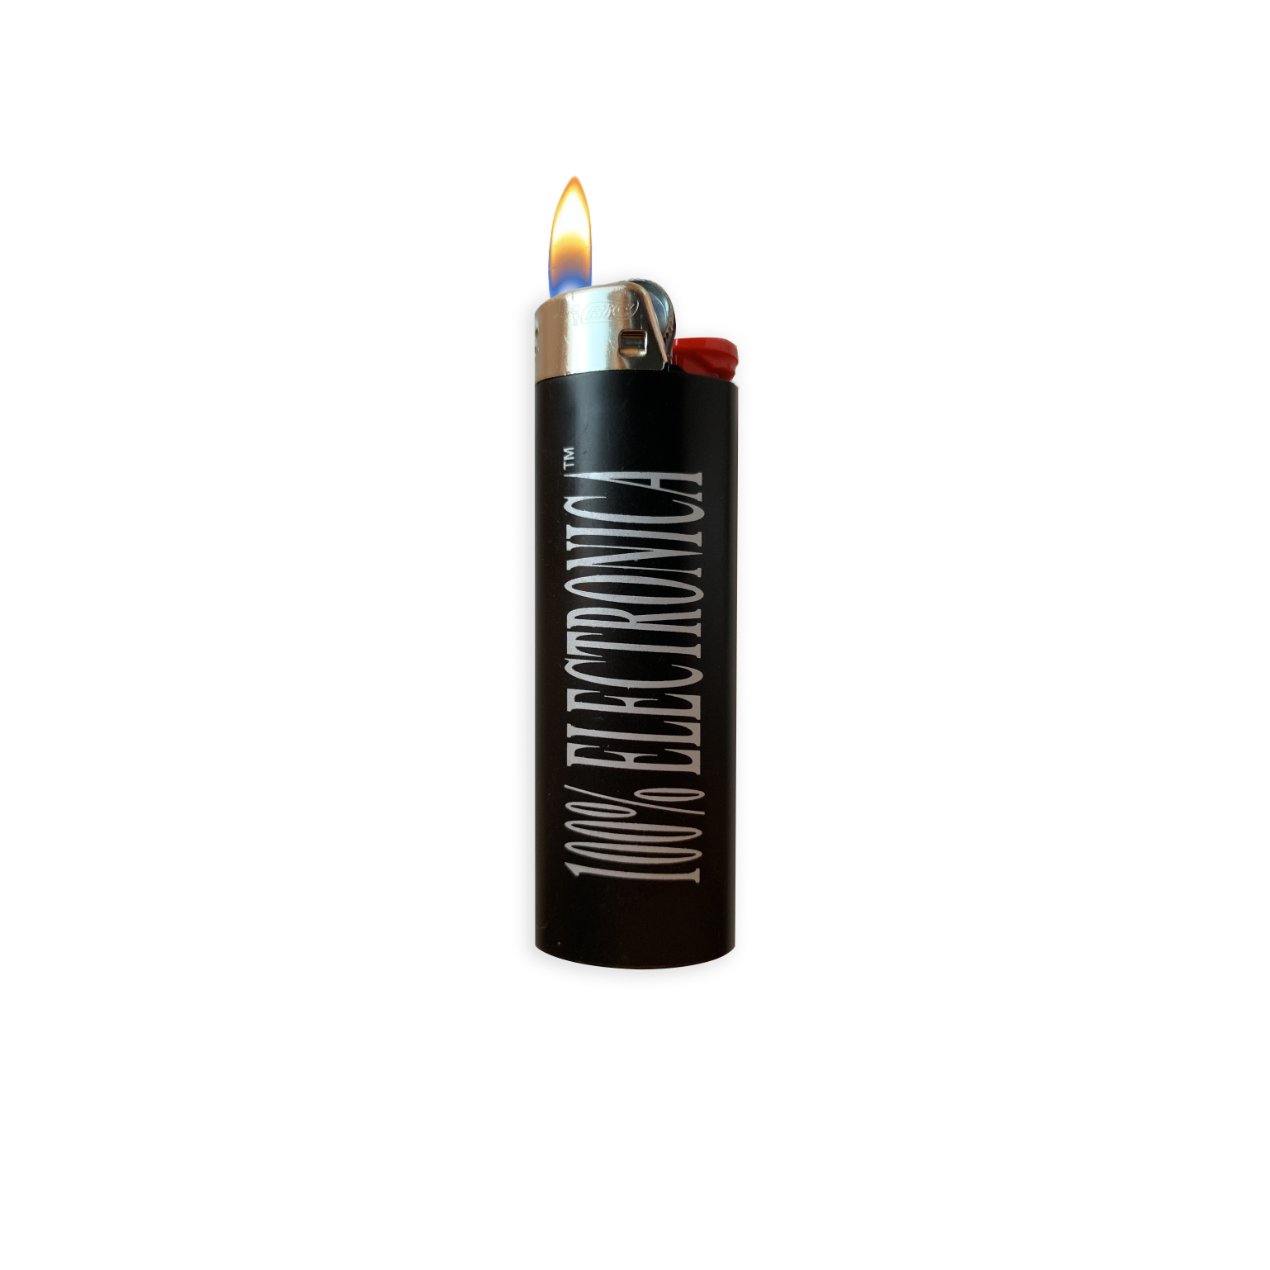 100% Electronica - 100% Electronica Logo Bic™ Lighter - 100% Electronica Official Store (Photo 2)